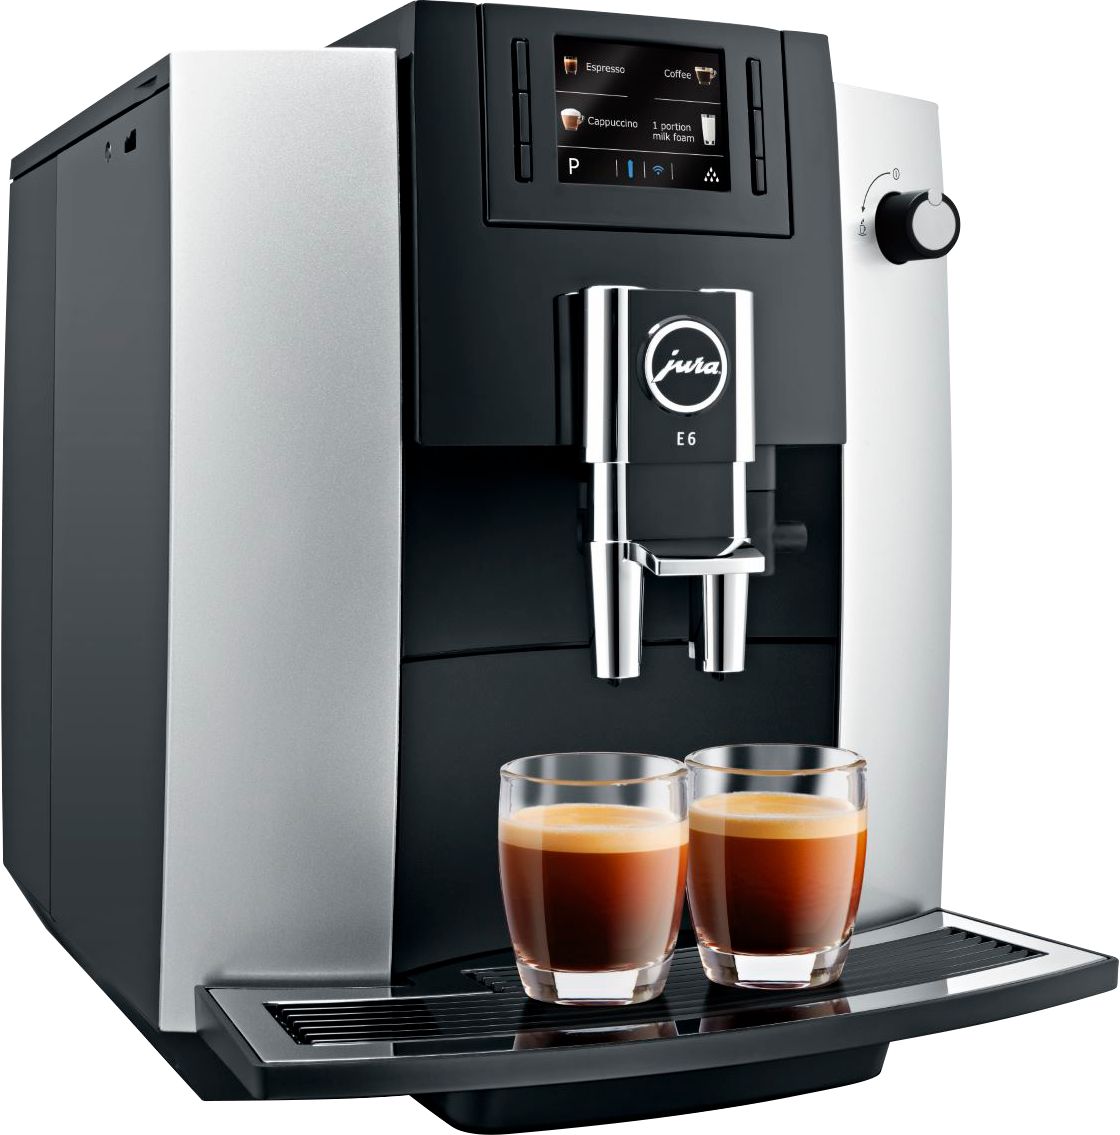 Left View: De'Longhi - Espresso Machine with 15 bars of pressure, Milk Frother and removable water tank - Stainless Steel